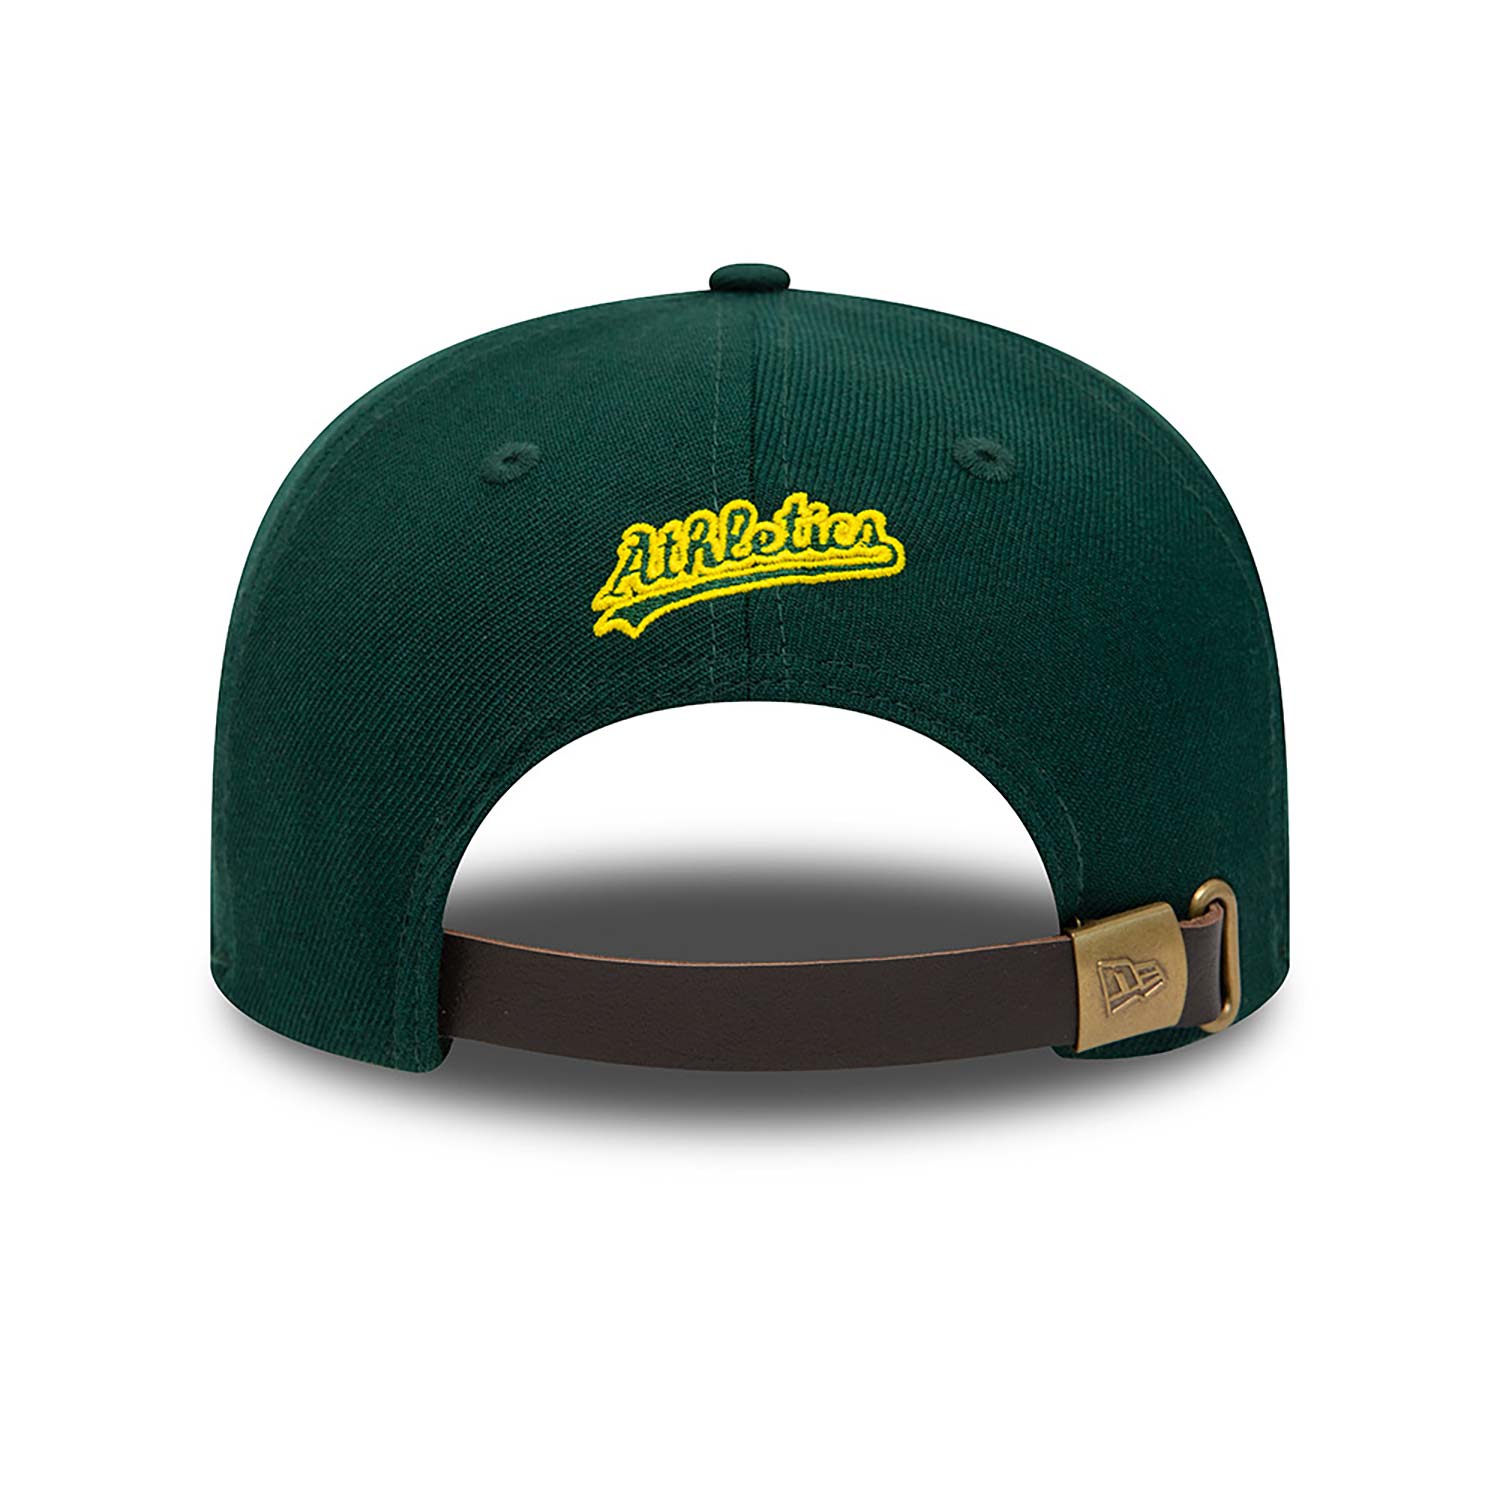 Oakland Athletics Cooperstown Multi Patch Green 9FIFTY Strapback Cap